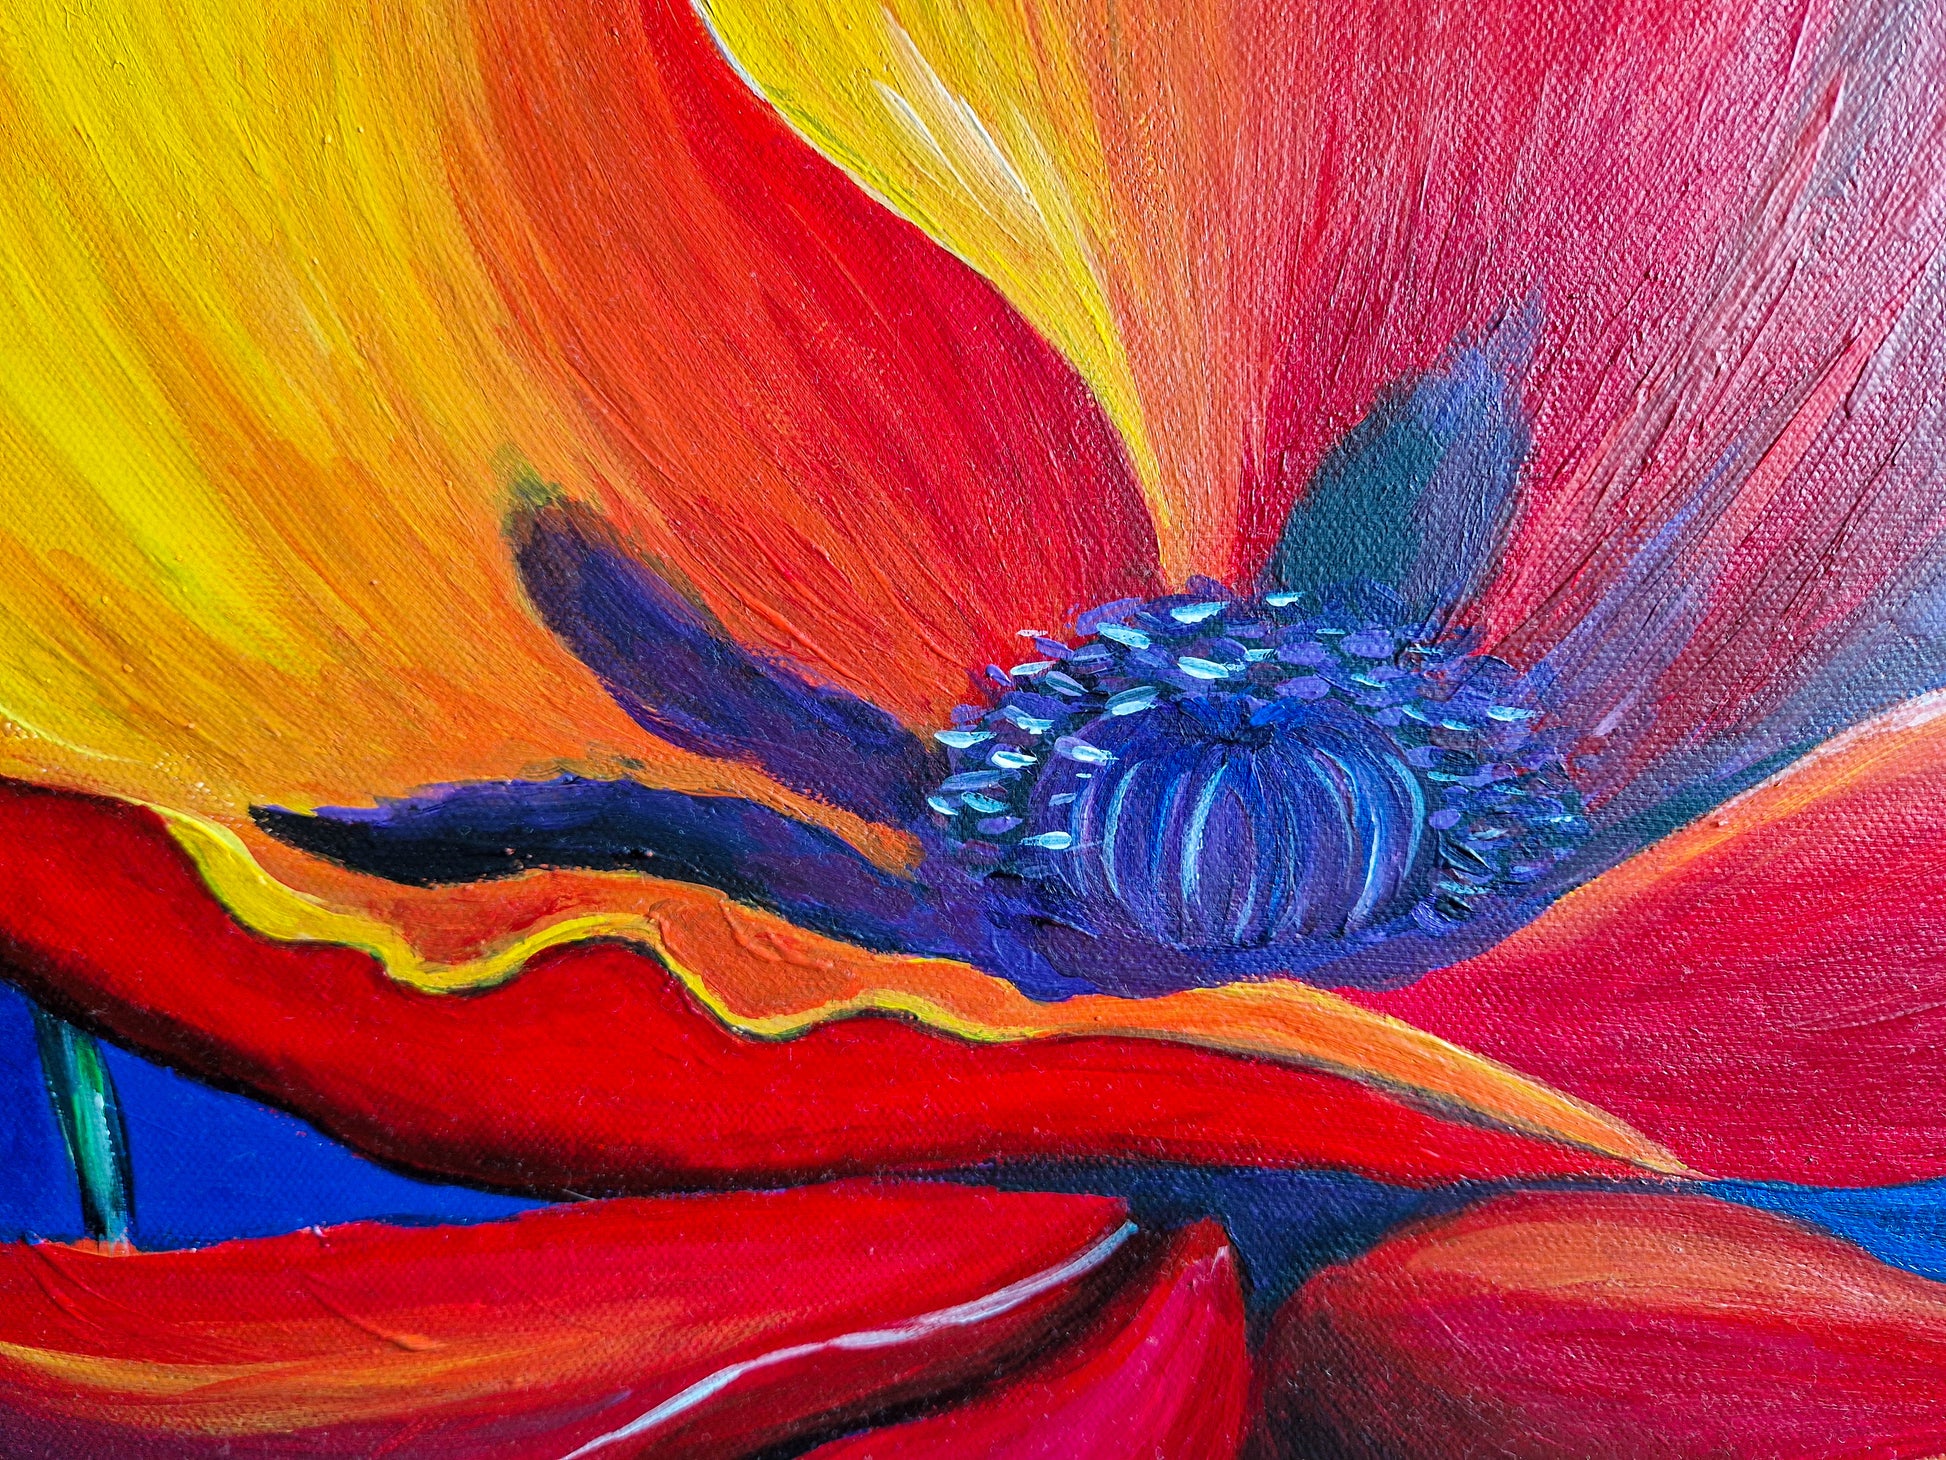 Acrylic Painting Paper - Poppy Red